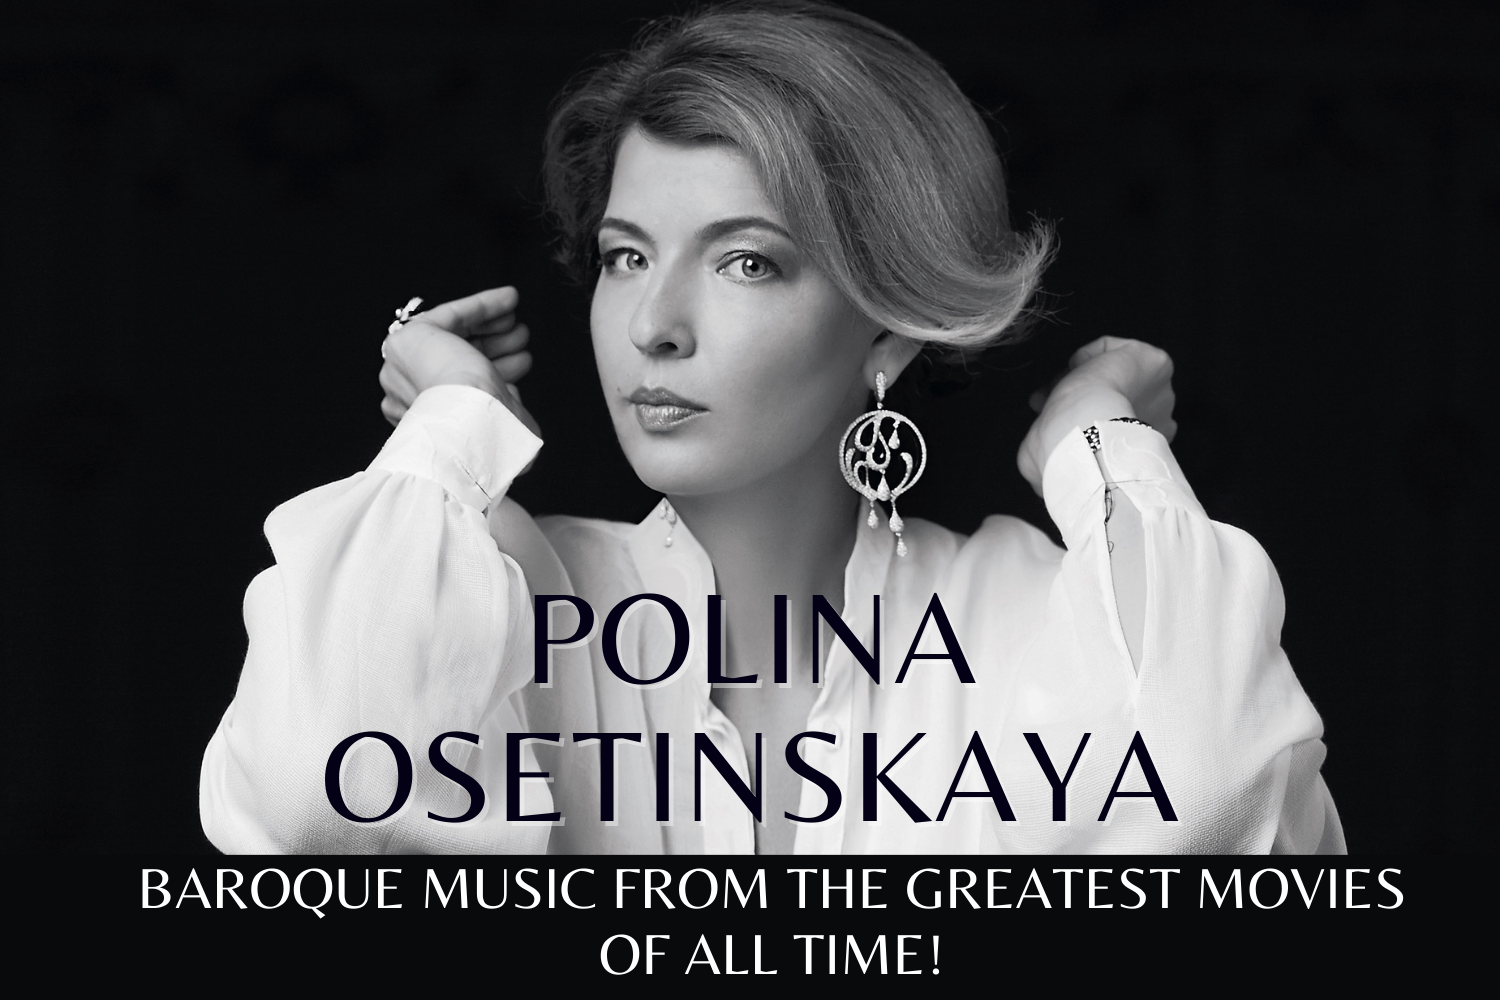 Polina Osetinskaya discusses Baroque Music from the Greatest Movies of All Time on The Oasis